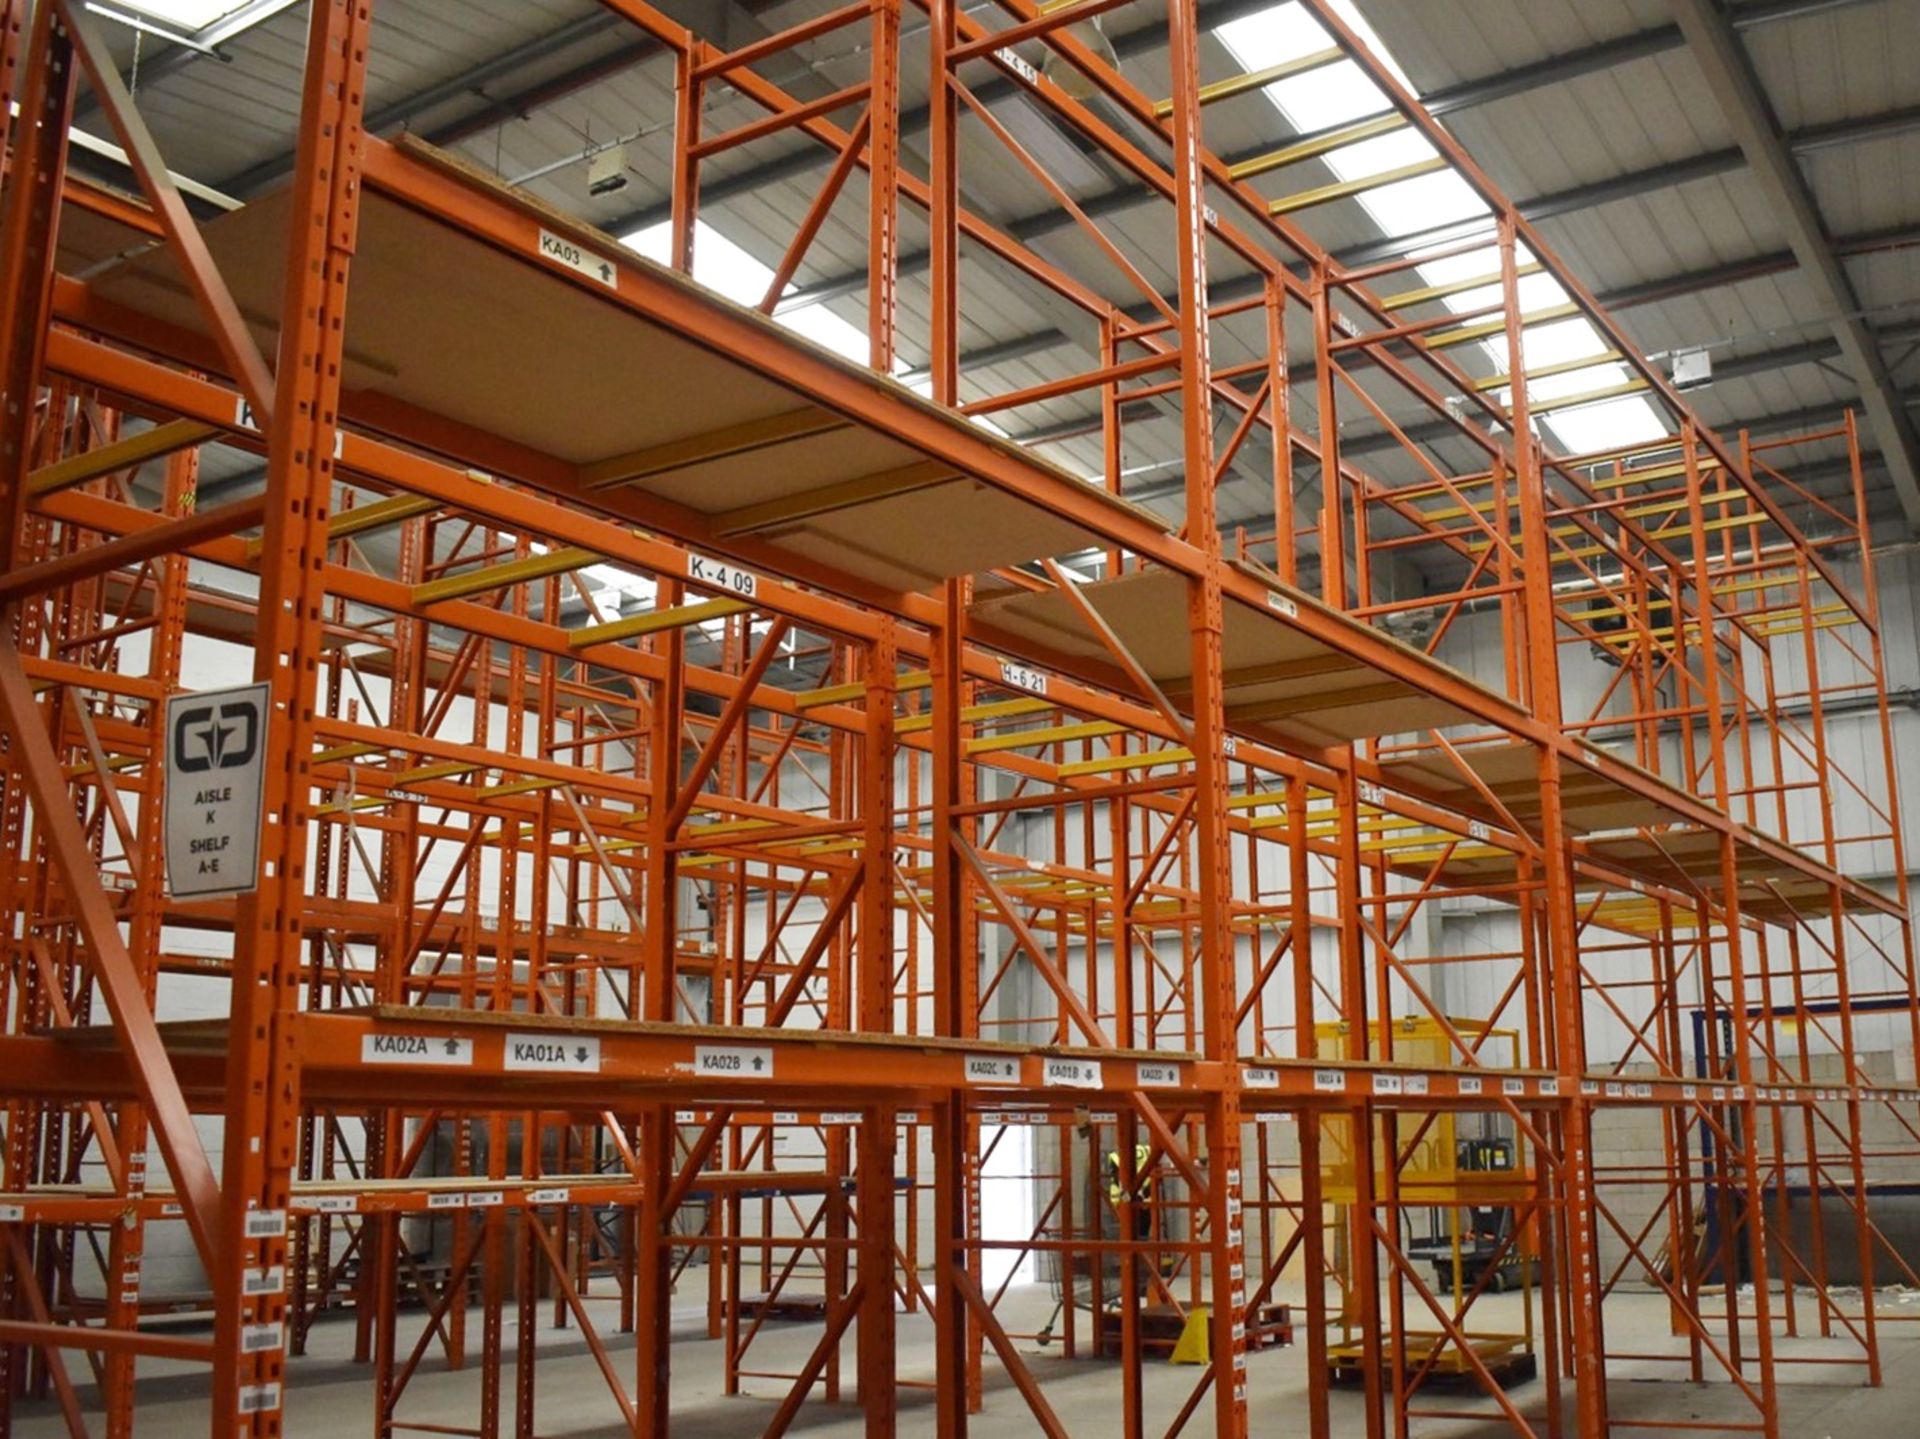 5 x Bays of RediRack Warehouse Pallet Racking - Lot Includes 6 x Uprights and 30 x Crossbeams - - Image 2 of 5